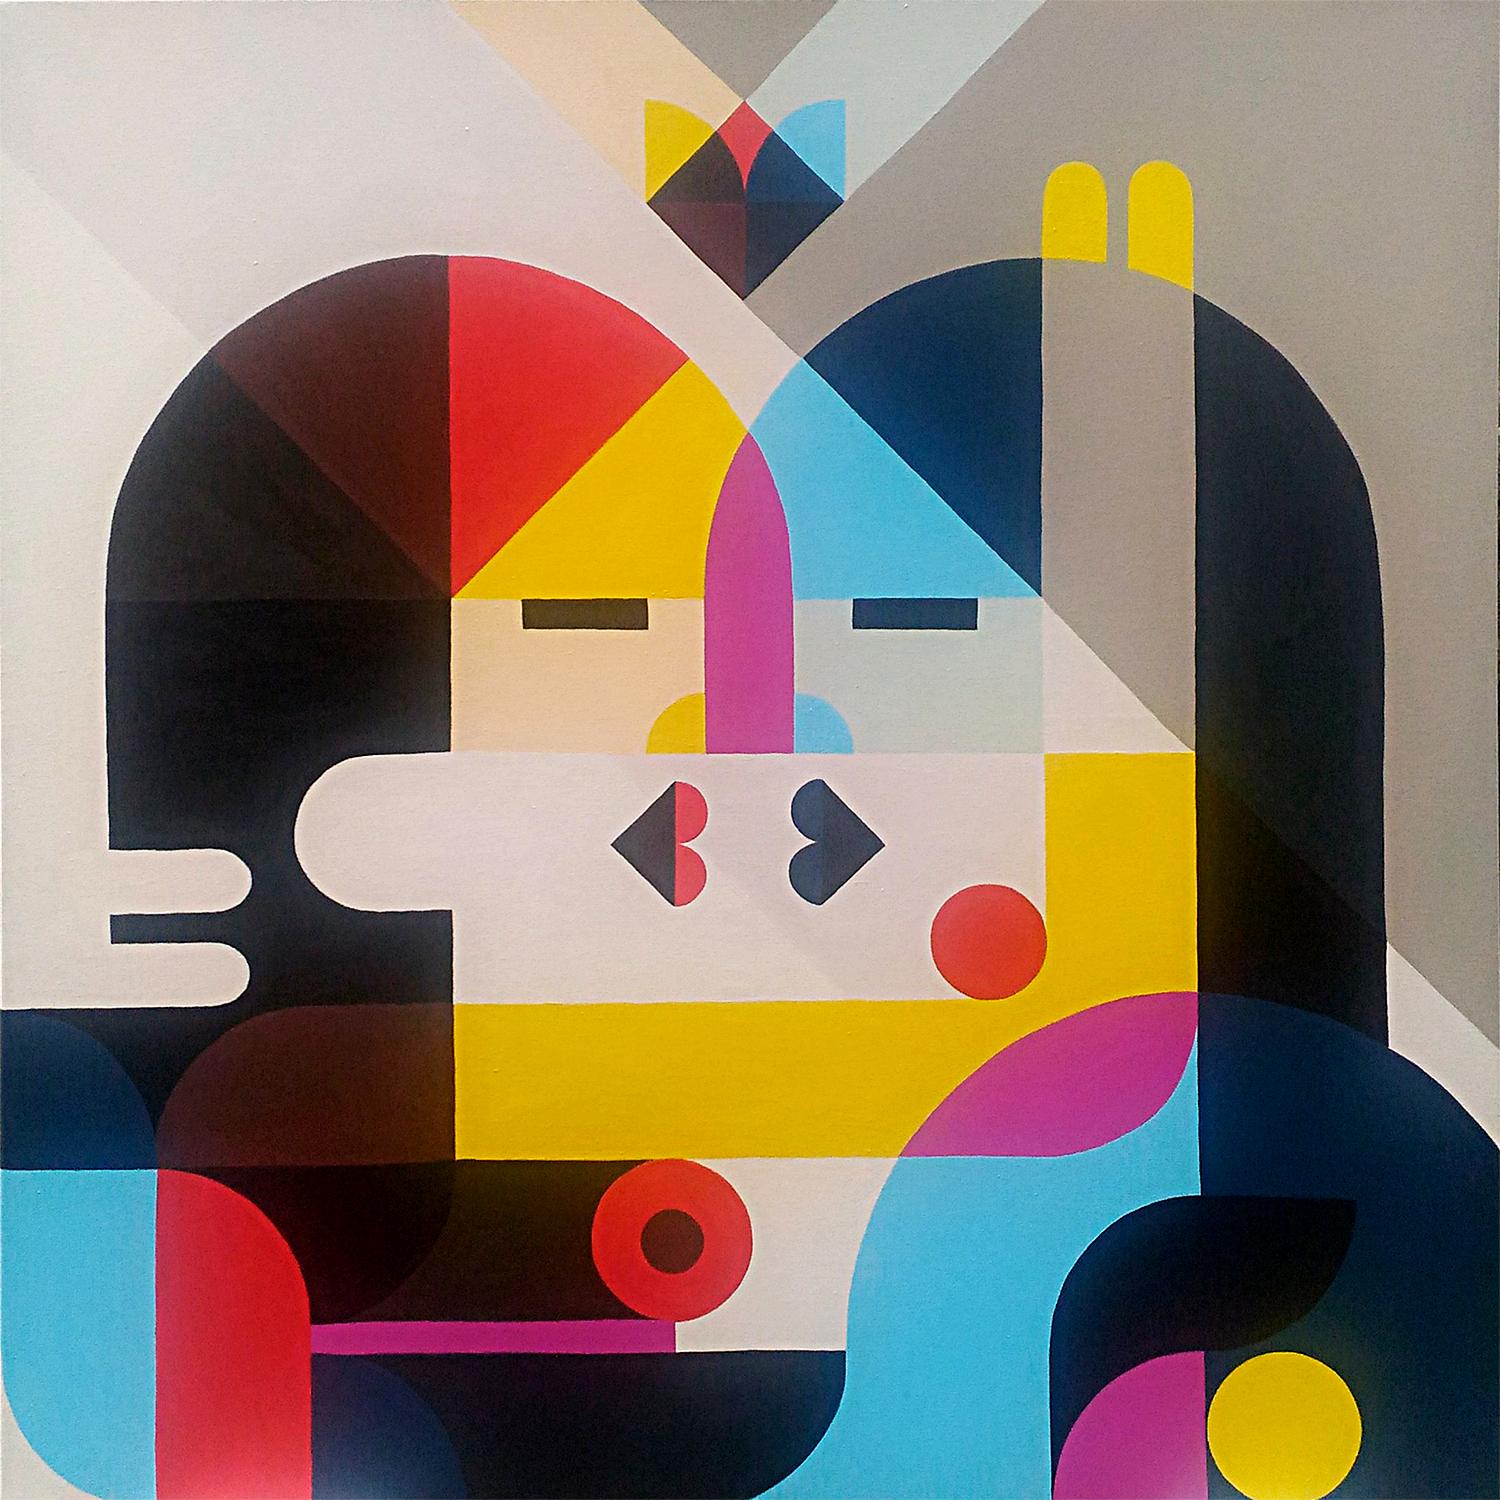 Antony Squizzato Figurative Painting - "Nose to nose", Neue Constructivist Multicolored Acrylic Painting